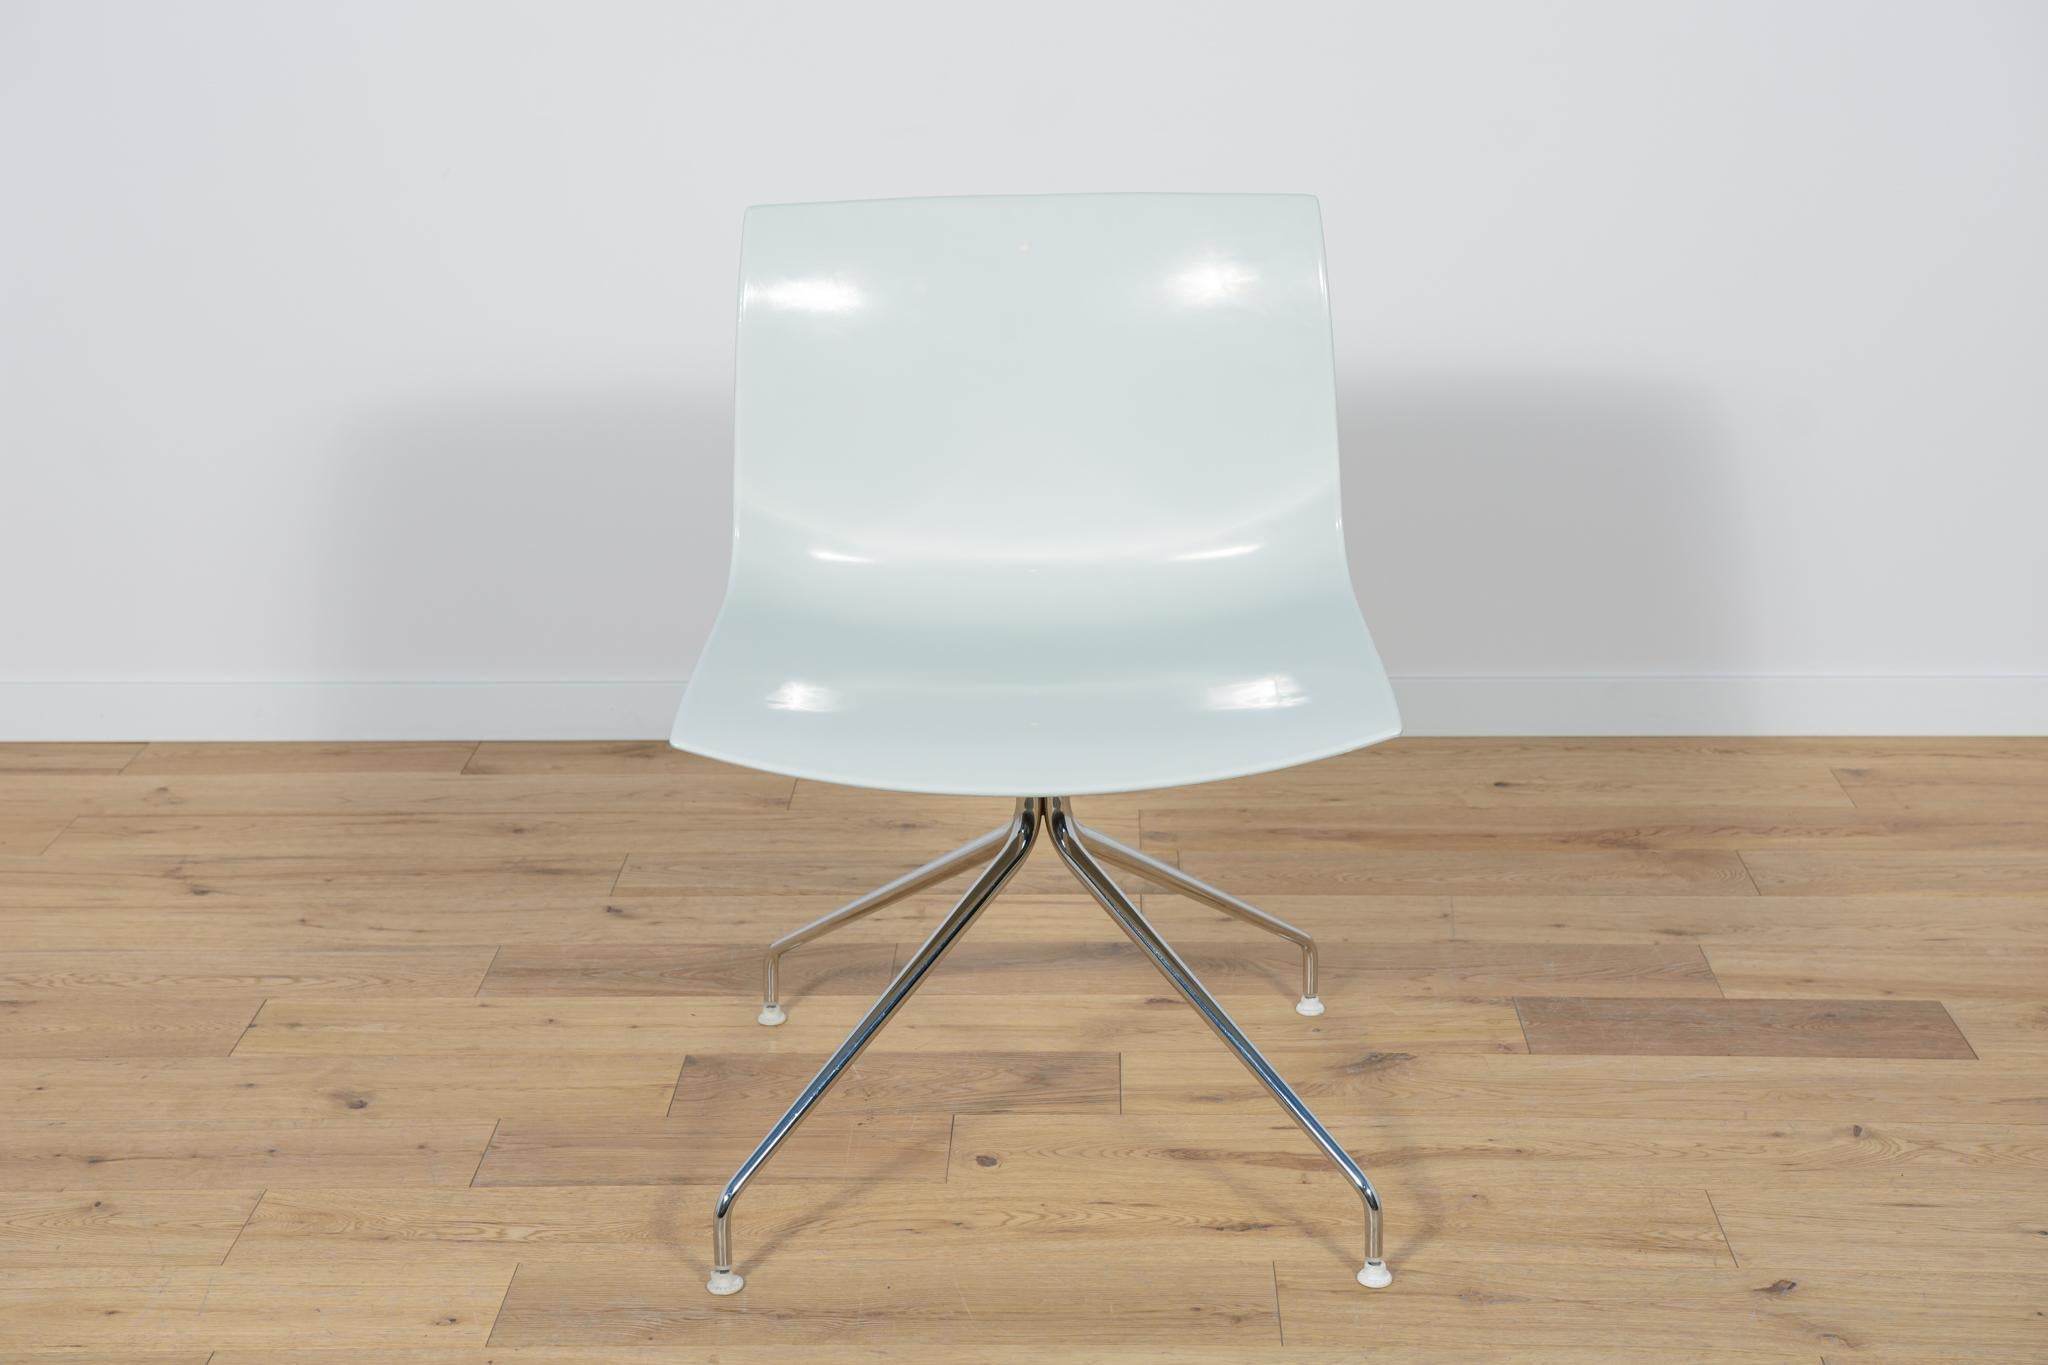 Chair were designed by Lievore Altherr Molina, produced by Arper at the beginning of the 21st century in Italy. The chair have chrome swivel legs. Chrome elements have been polished. Ergonomic seats made of strong plastic. The chairs have undergone